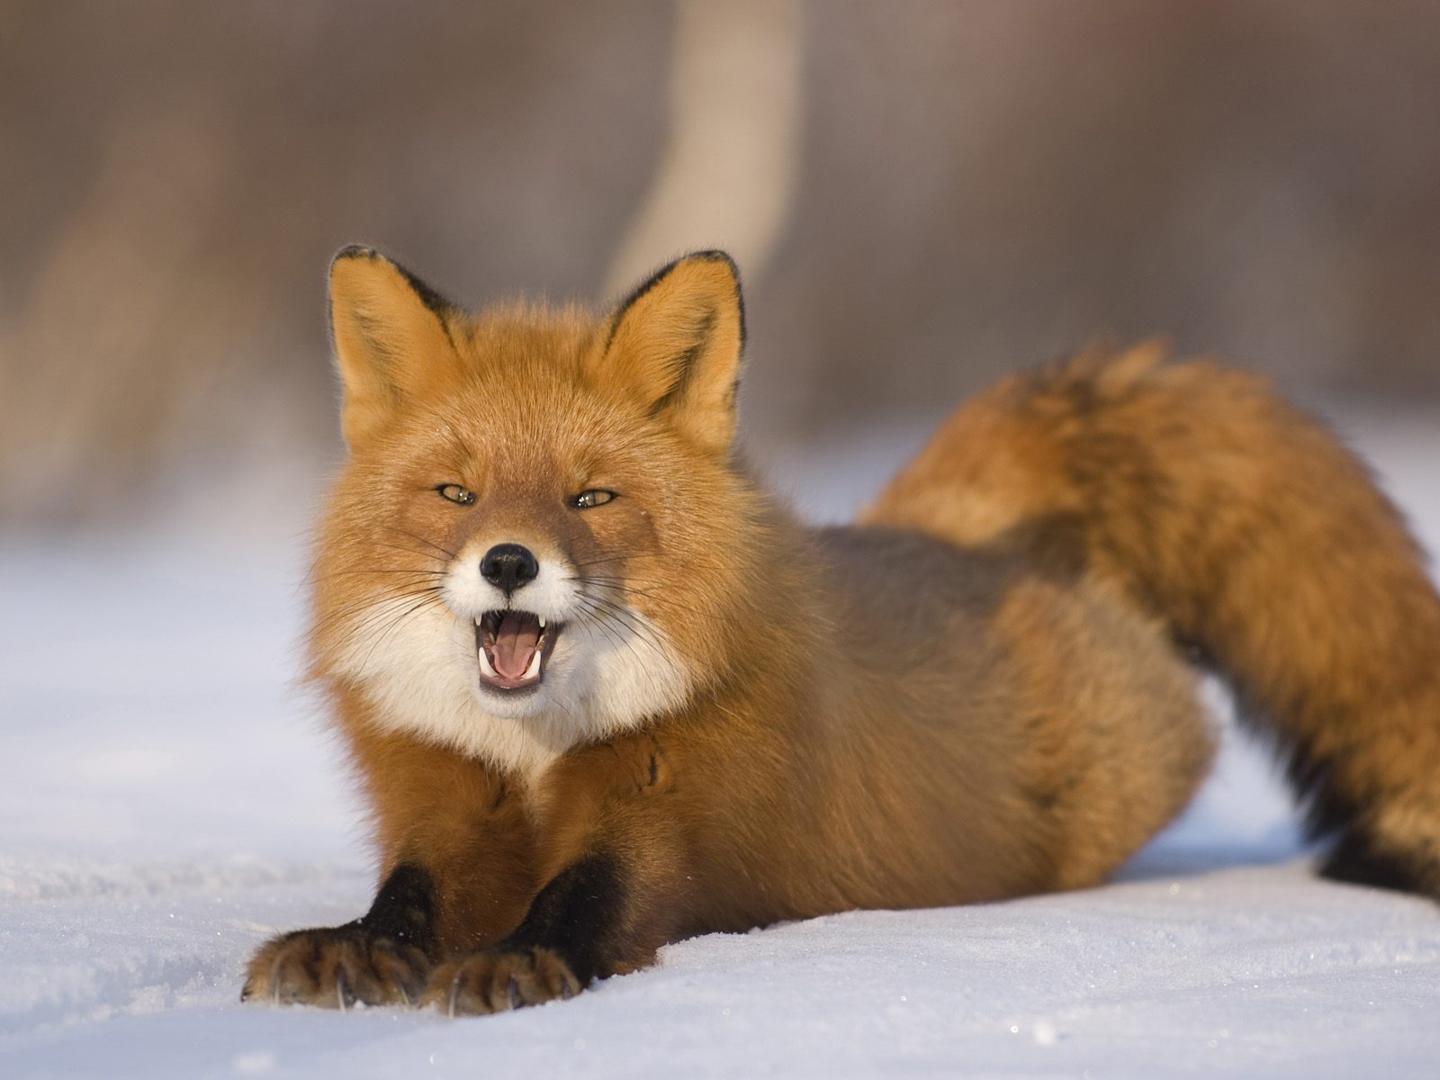 Young red fox in snow free desktop background wallpaper image